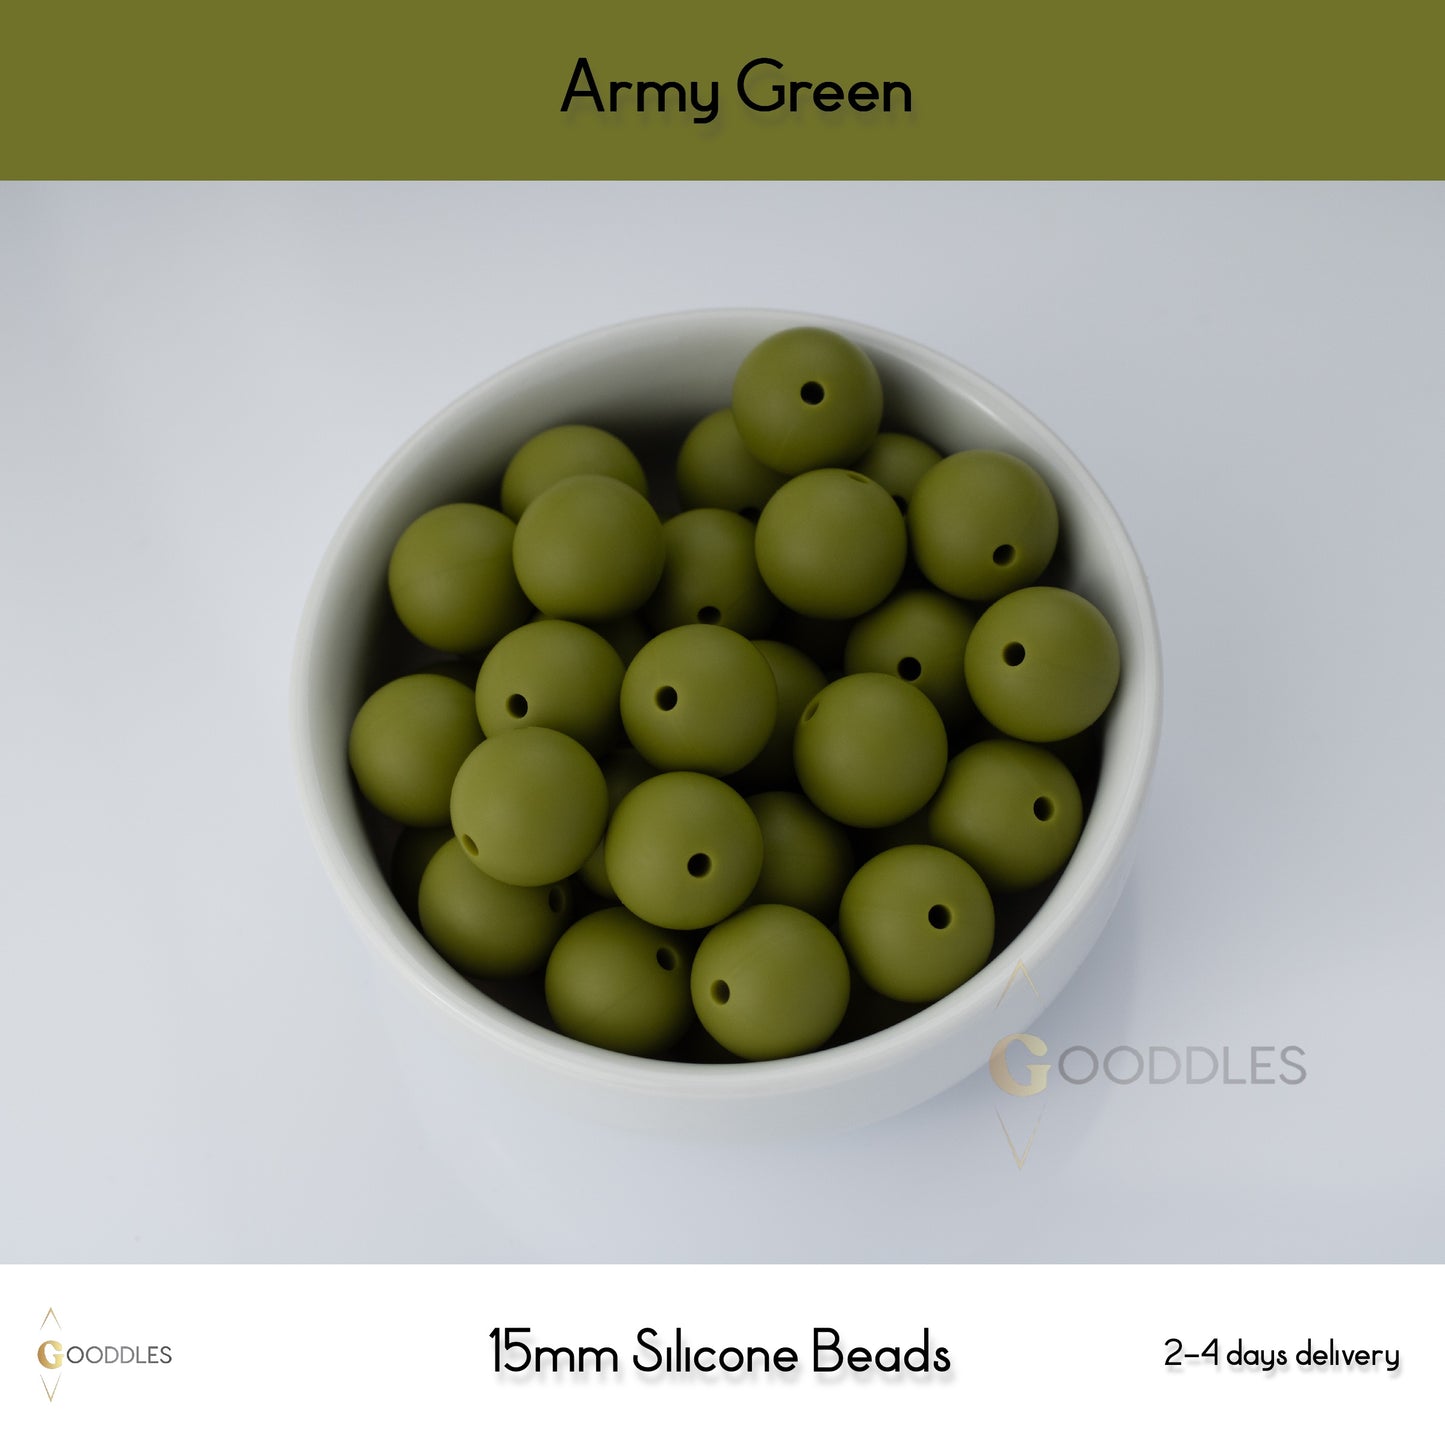 5pcs, Army Green Silicone Beads Round Silicone Beads